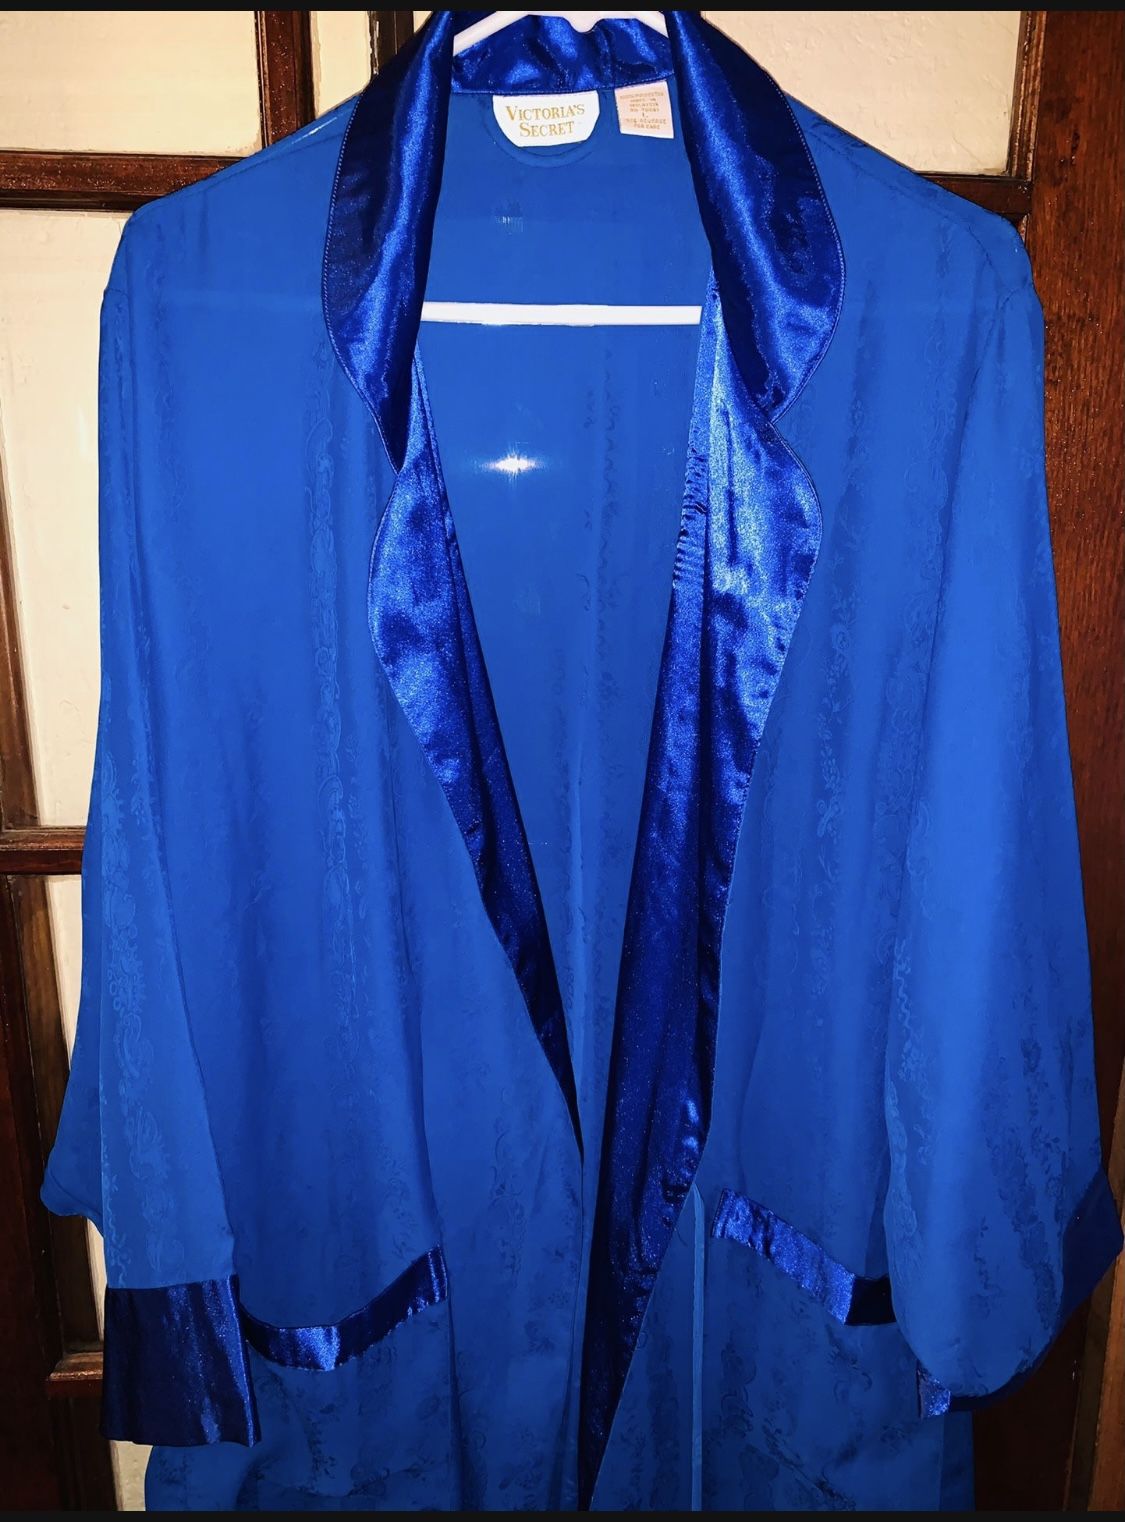 VICTORIA’S SECRET KIMONO STYLE LOUNGING ROBE BELL SLEEVES SIZE L  Electric Blue  - UNUSED PET AND SMOKE FREE ENVIRONMENT 